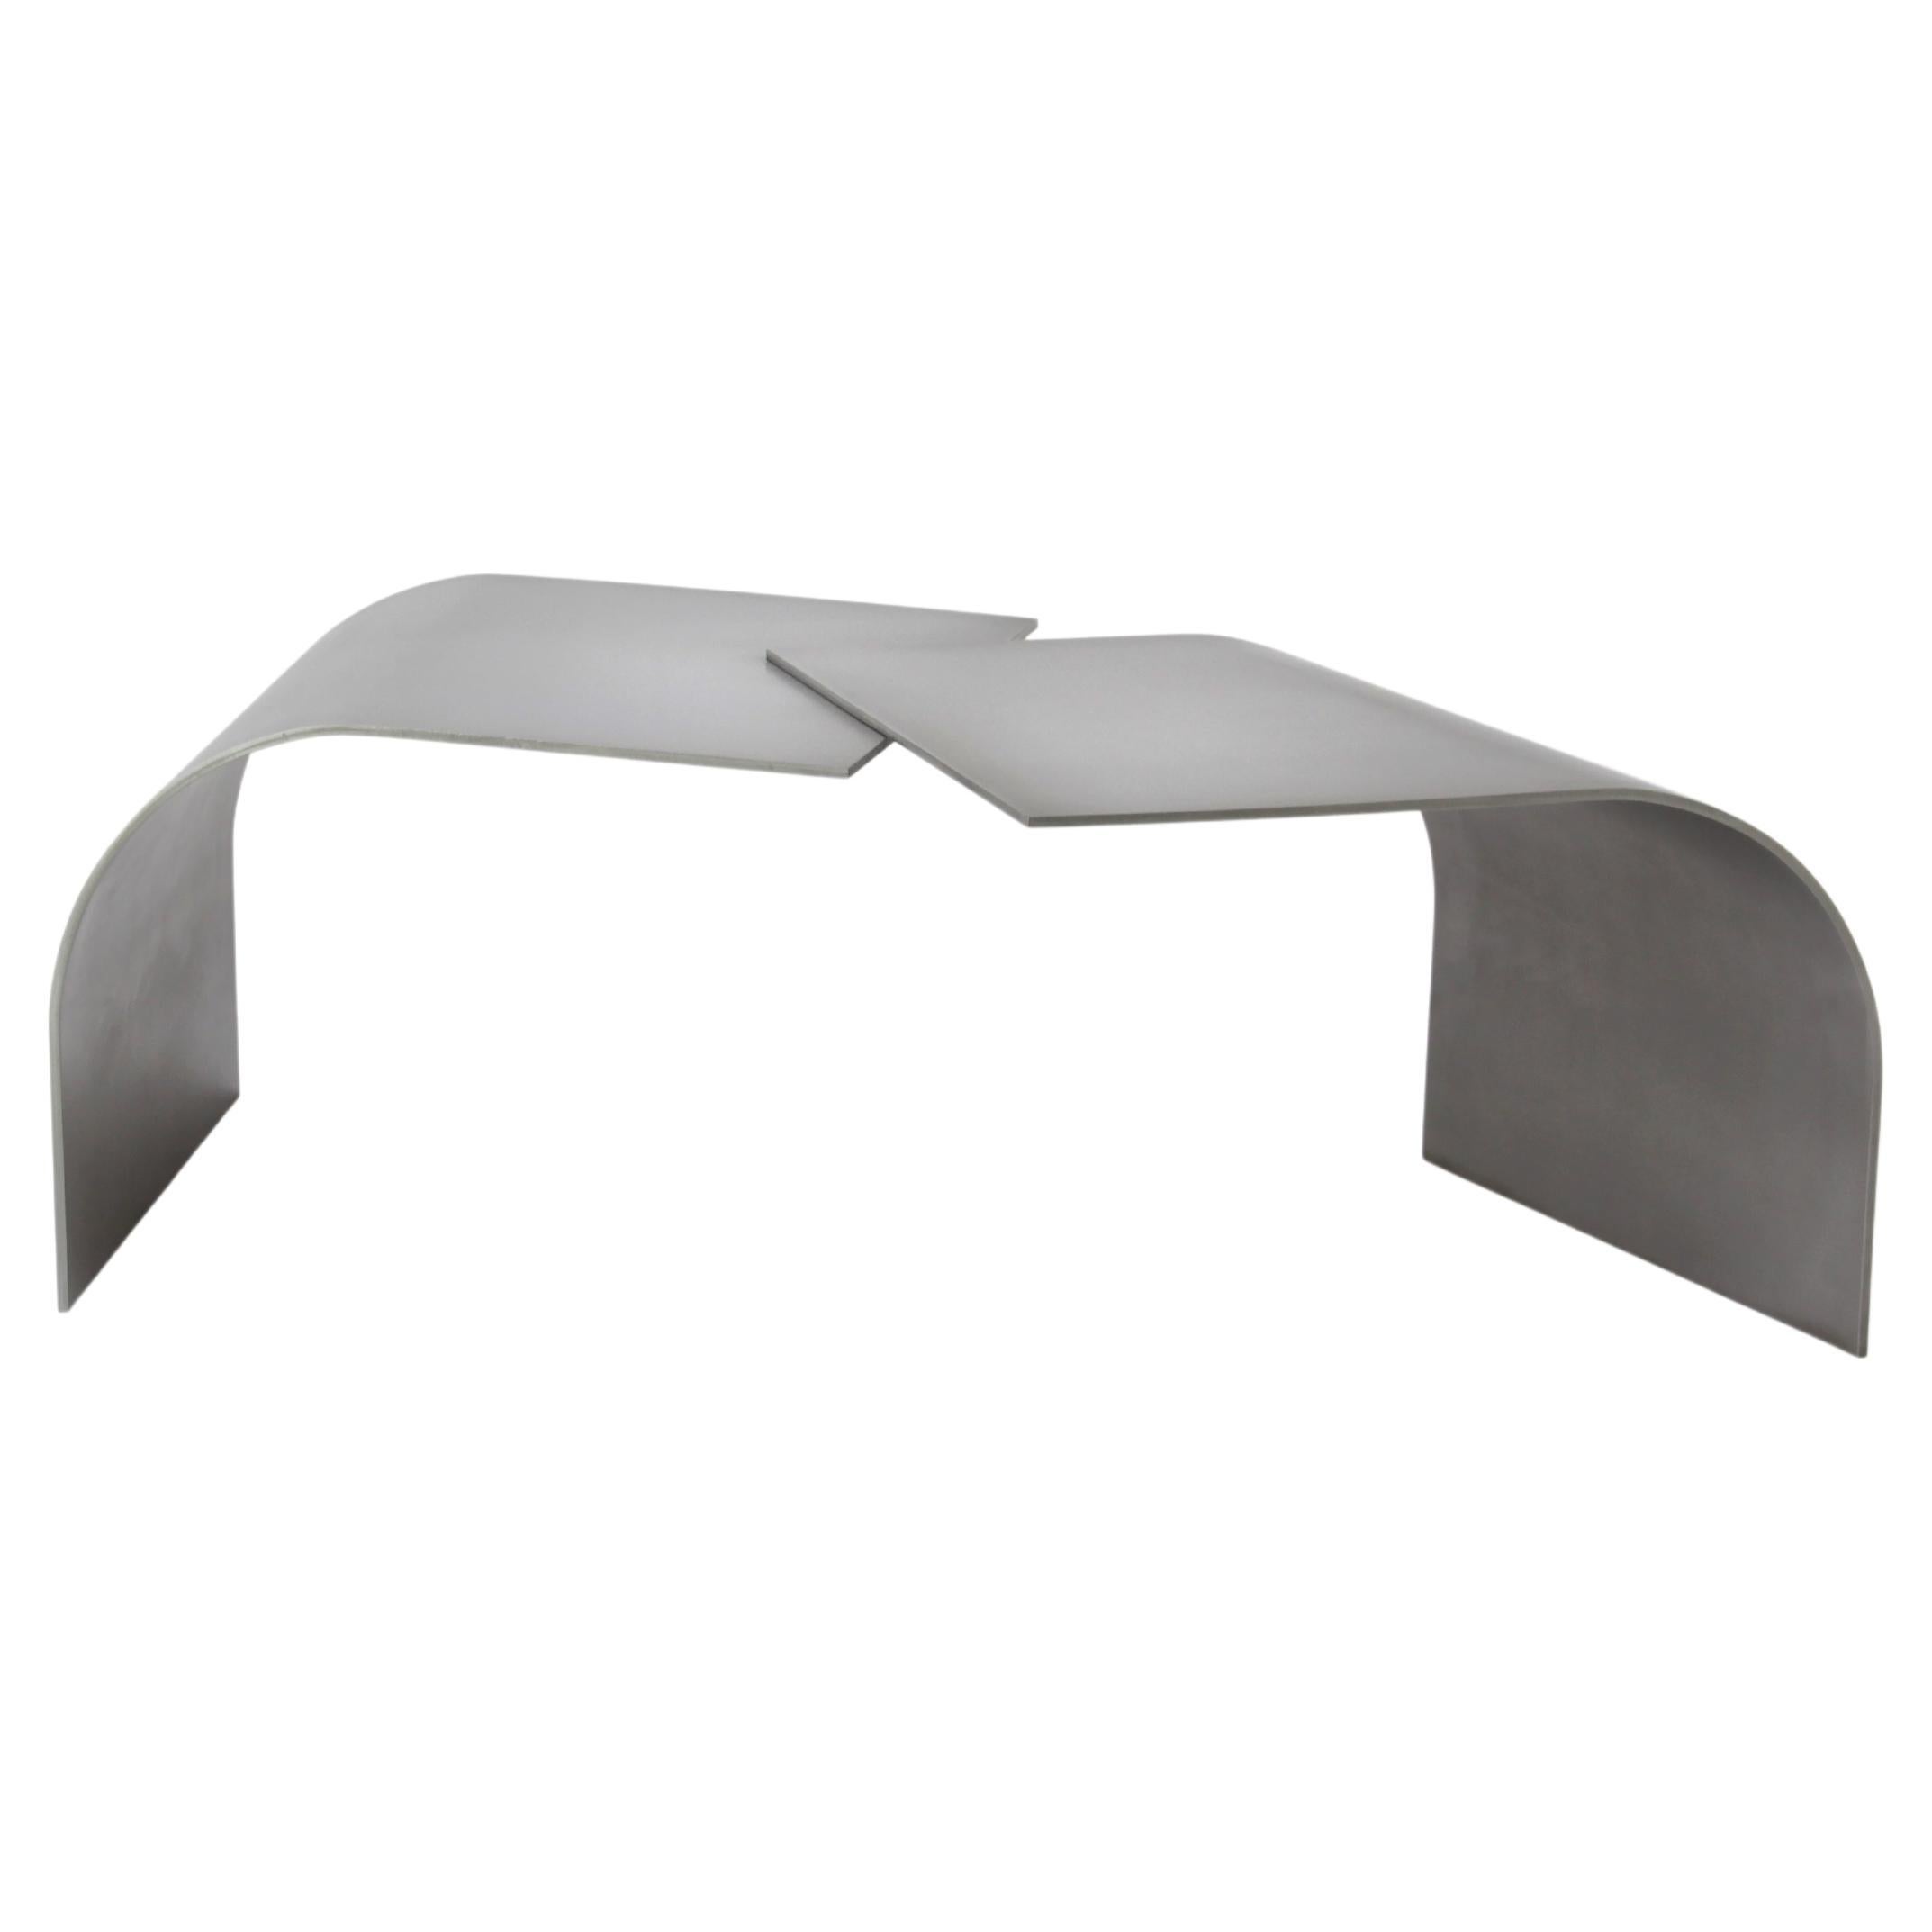 Contemporary, minimalist grey stainless steel Wals low table by Maria Tyakina For Sale